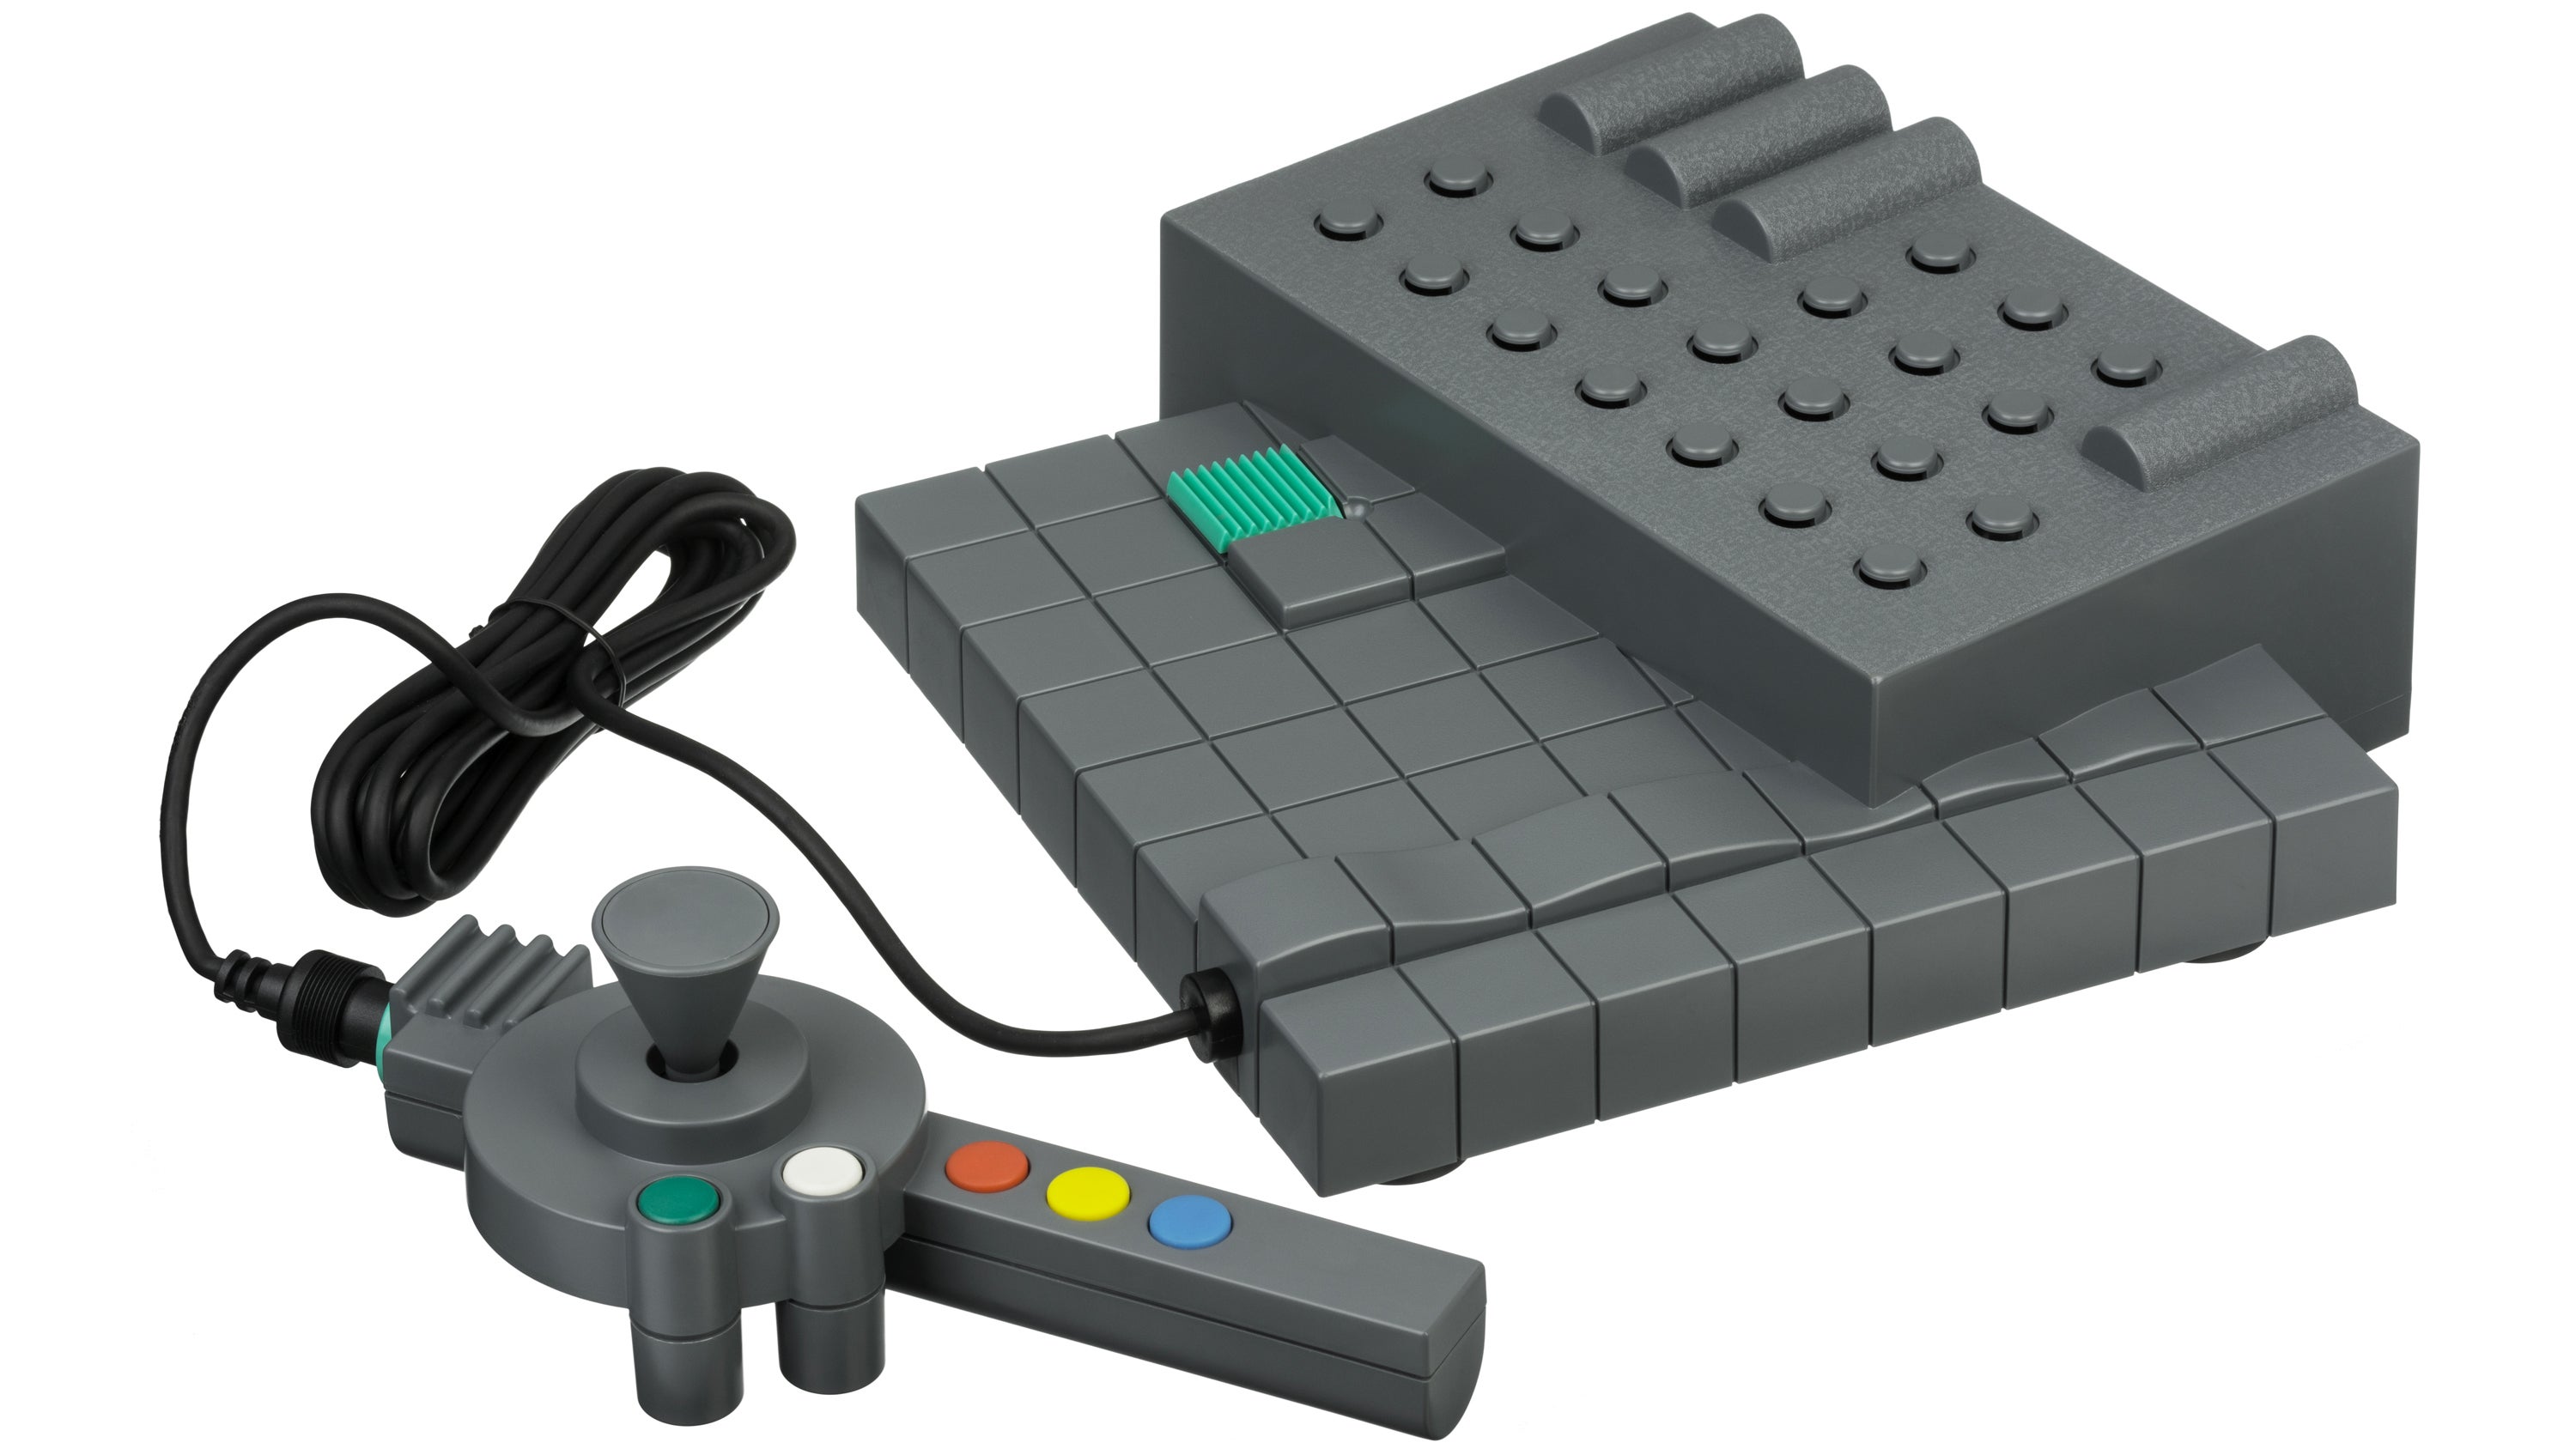 The Forgotten Video Game Consoles Lego Will Never Turn Into Buildable Sets